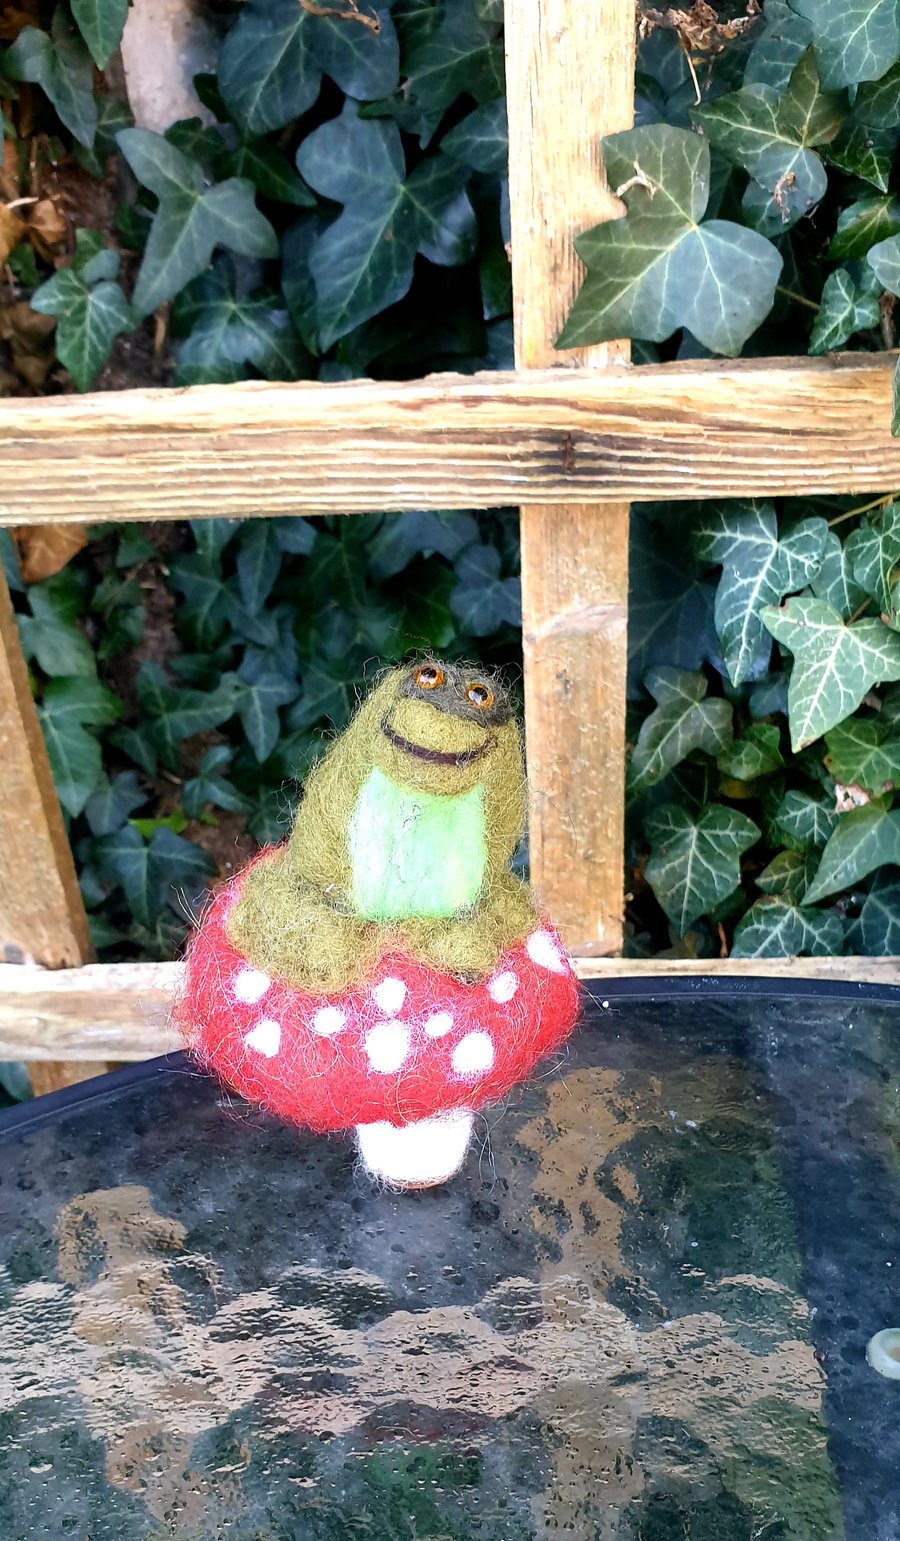 Whatcraft Merino Wool Needle Felted Sculpture of A Toad On A Toadstool 14cm